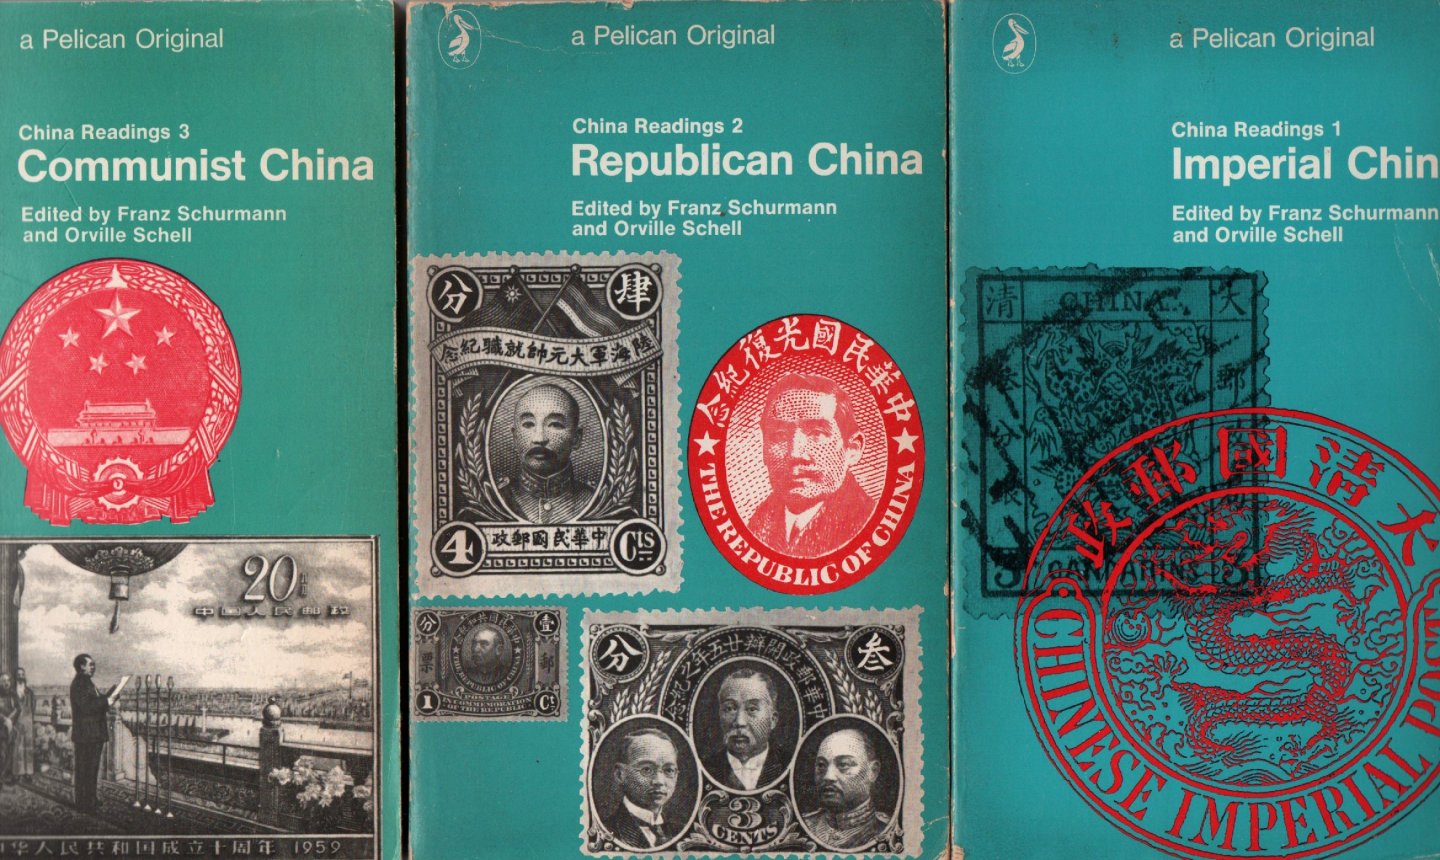 Schurmann, Franz and Orville Schell - China Readings 1: Imperial China, 2: Republican China en 3: Communist China, 1967, 1968 en 1971